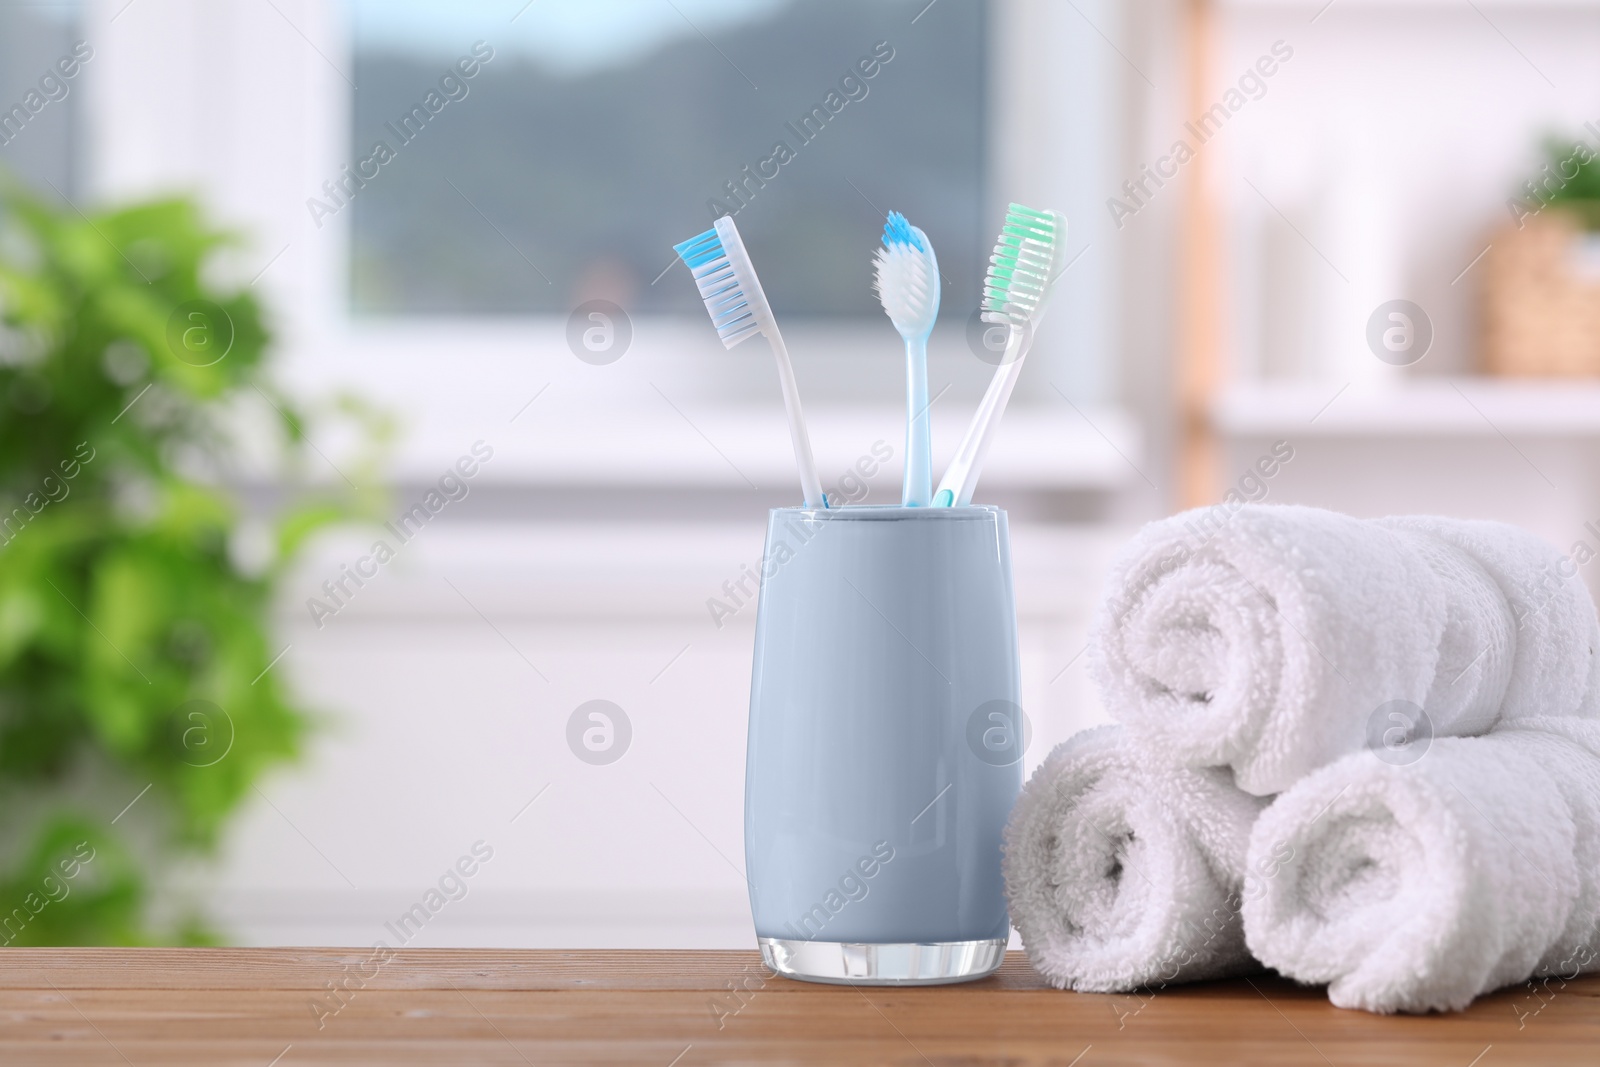 Photo of Plastic toothbrushes in holder and towels on wooden table. Space for text